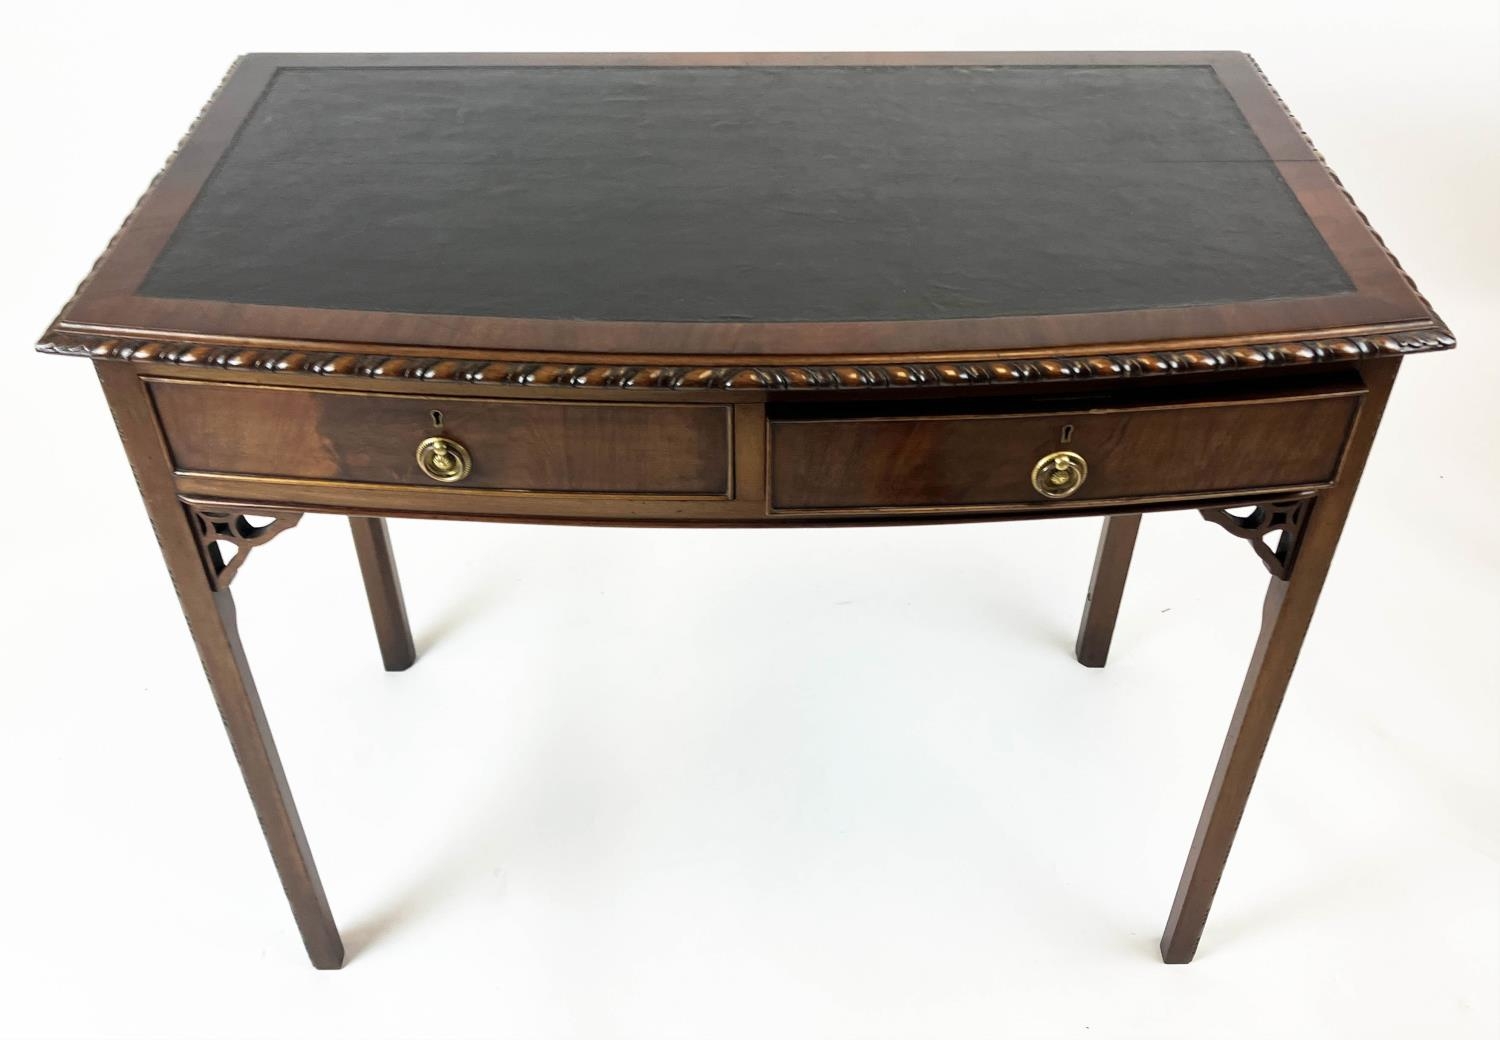 BOWFRONT SIDE TABLE, early 20th century George II style, mahogany with two drawers with leather